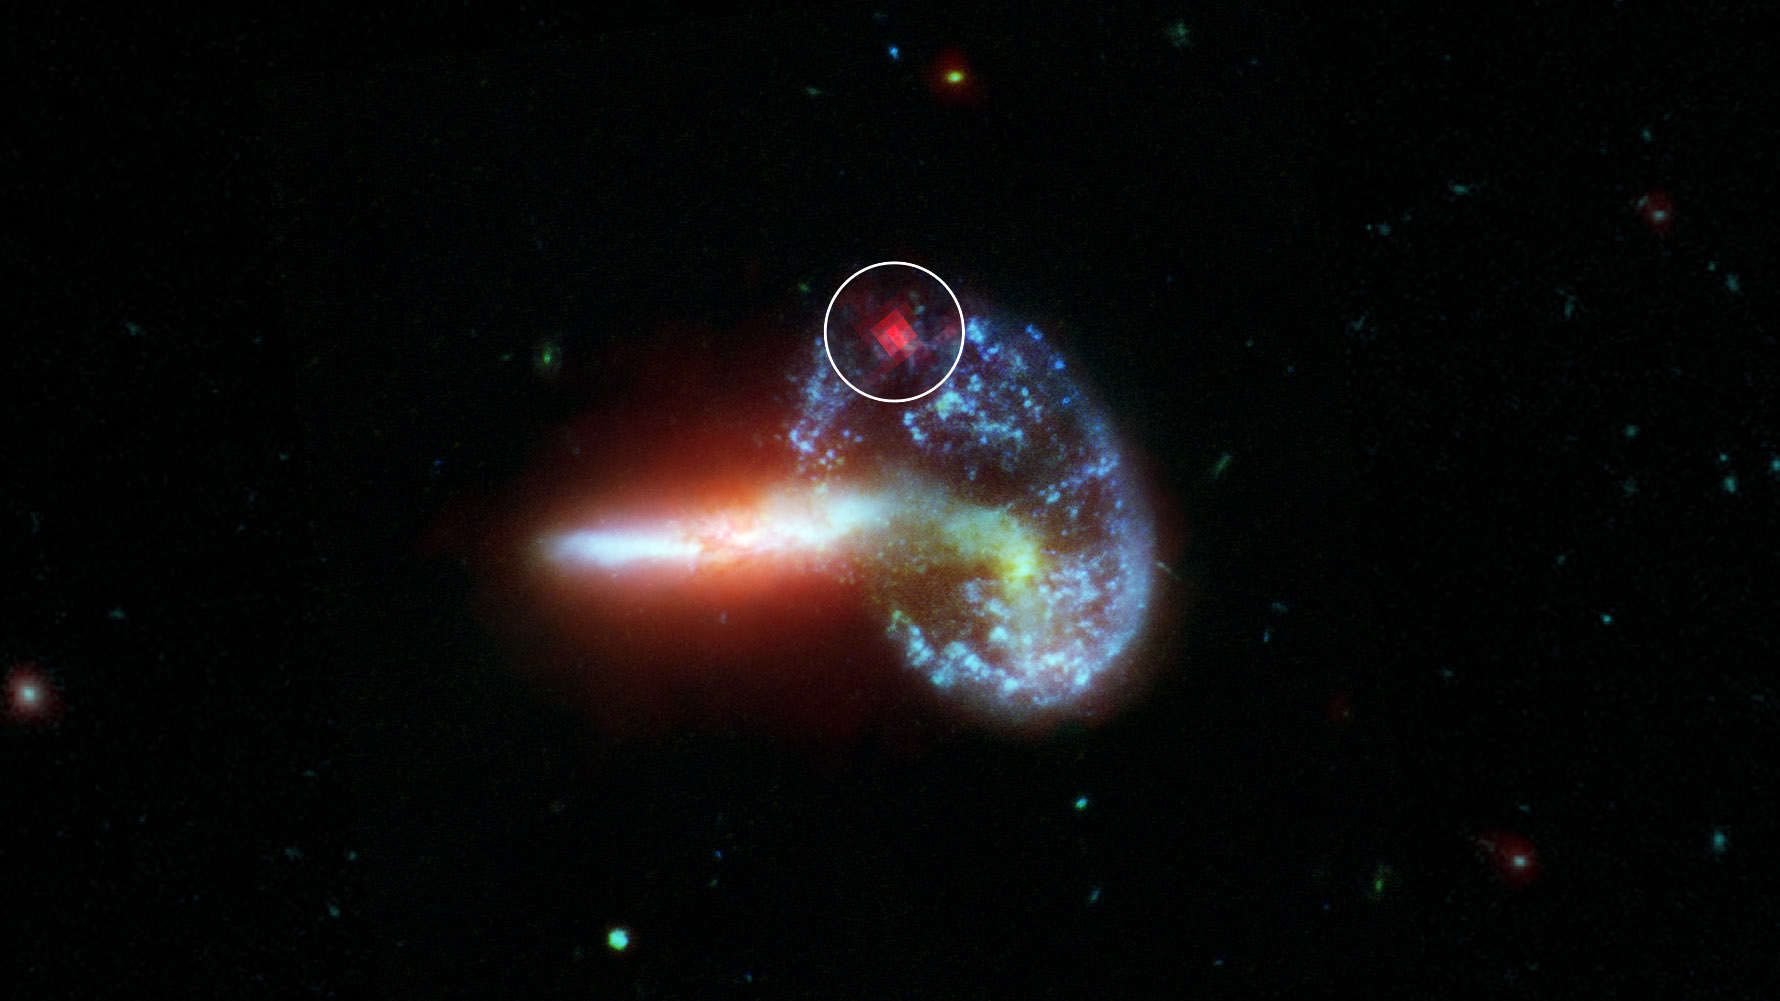 Missing link found: supernovae give rise to black holes or neutron stars